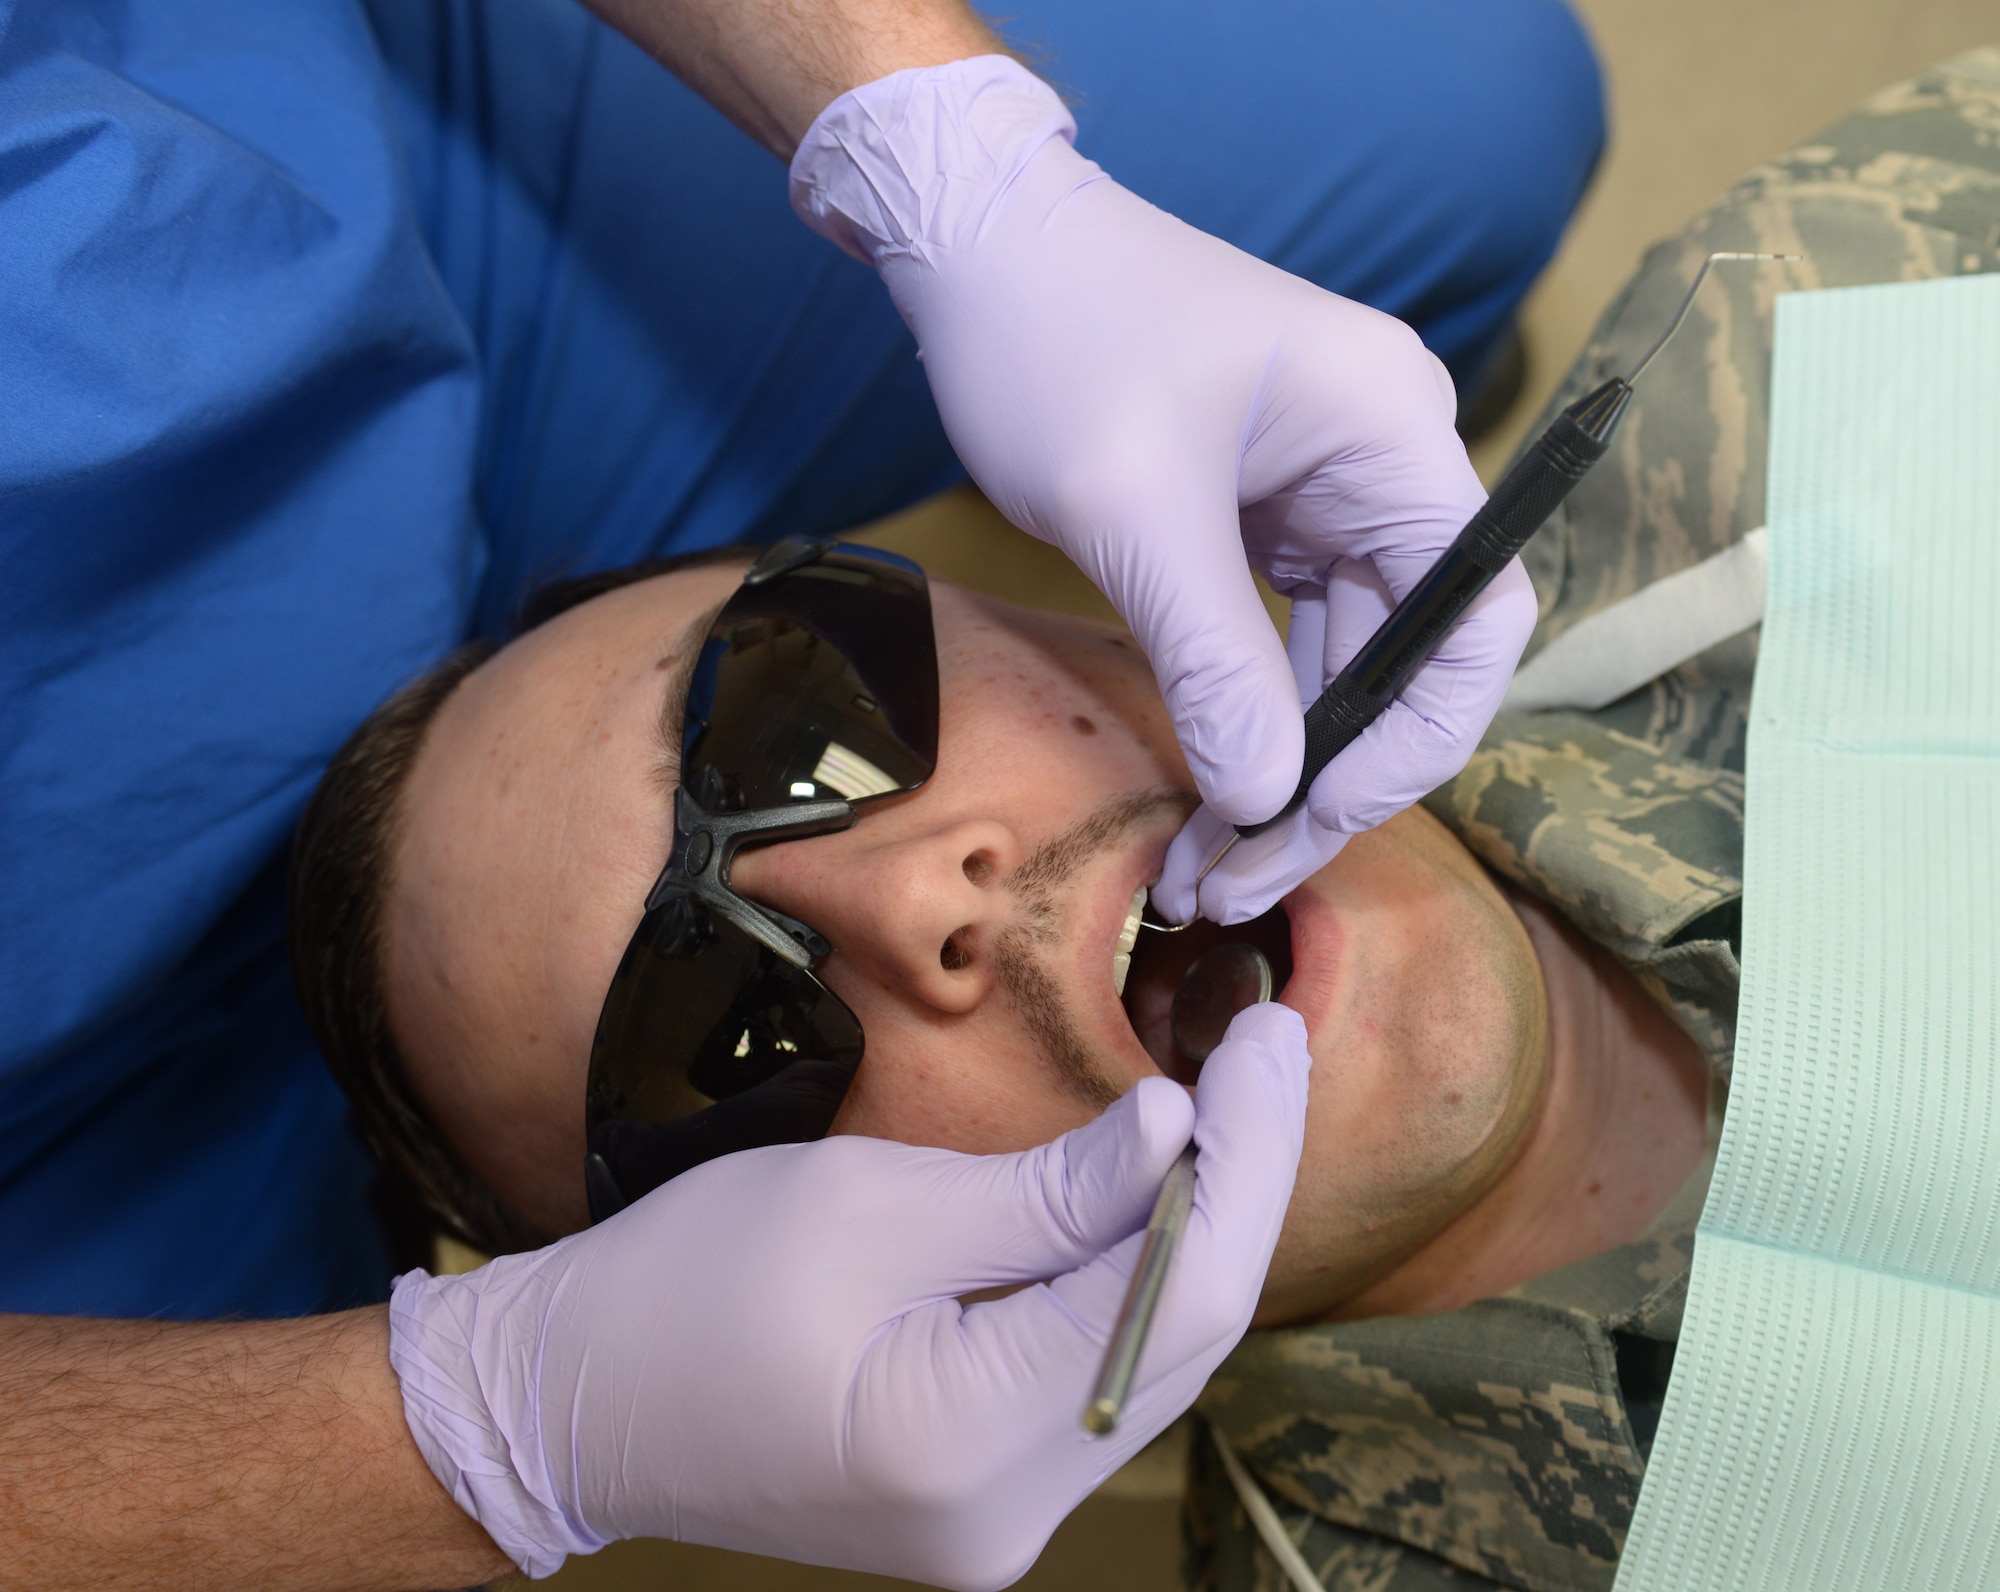 Staff Sgt. William Garrett, a 28th Medical Group Dental Clinic dental technician, checks the teeth of Tech. Sgt. Michael Wilde, the 28th MDG noncommissioned officer in charge of clinical support, during an appointment at Ellsworth Air Force Base, S.D., March 6, 2018. The dental clinic at Ellsworth AFB has been in operation since 1948. (U.S. Air Force photo by Airman 1st Class Thomas Karol)